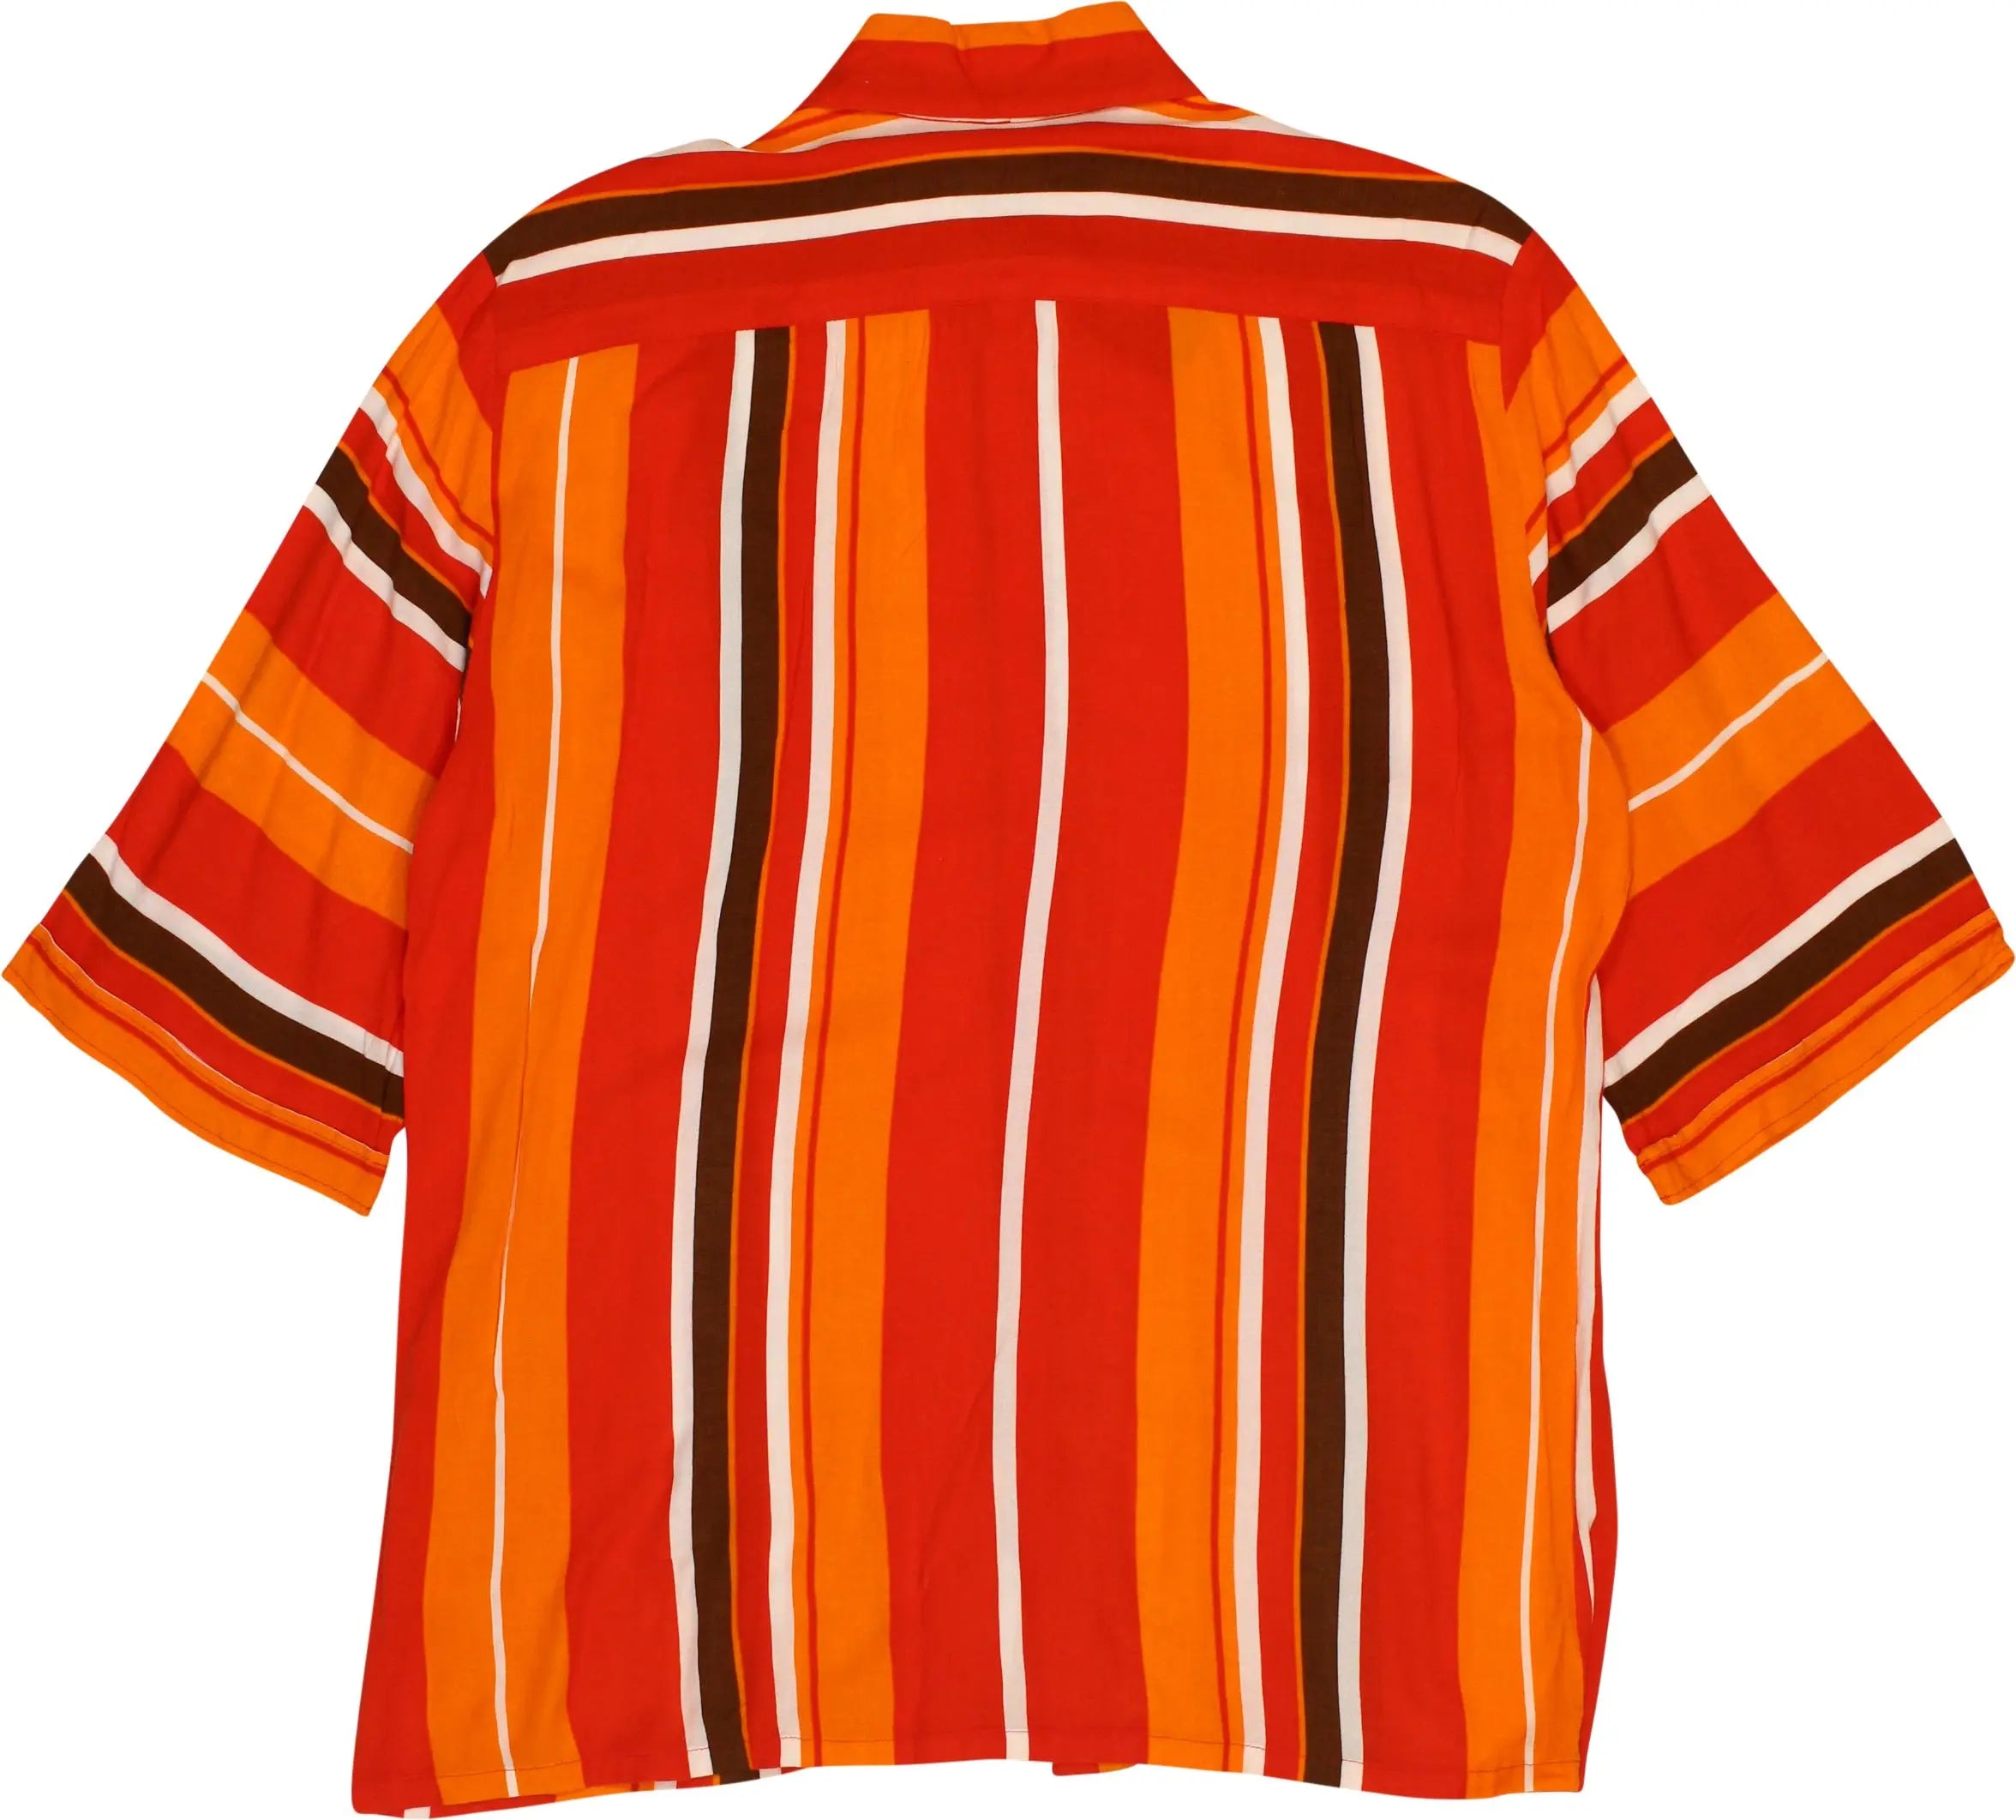 Handmade - Handmade 70s Style Striped Shirt- ThriftTale.com - Vintage and second handclothing